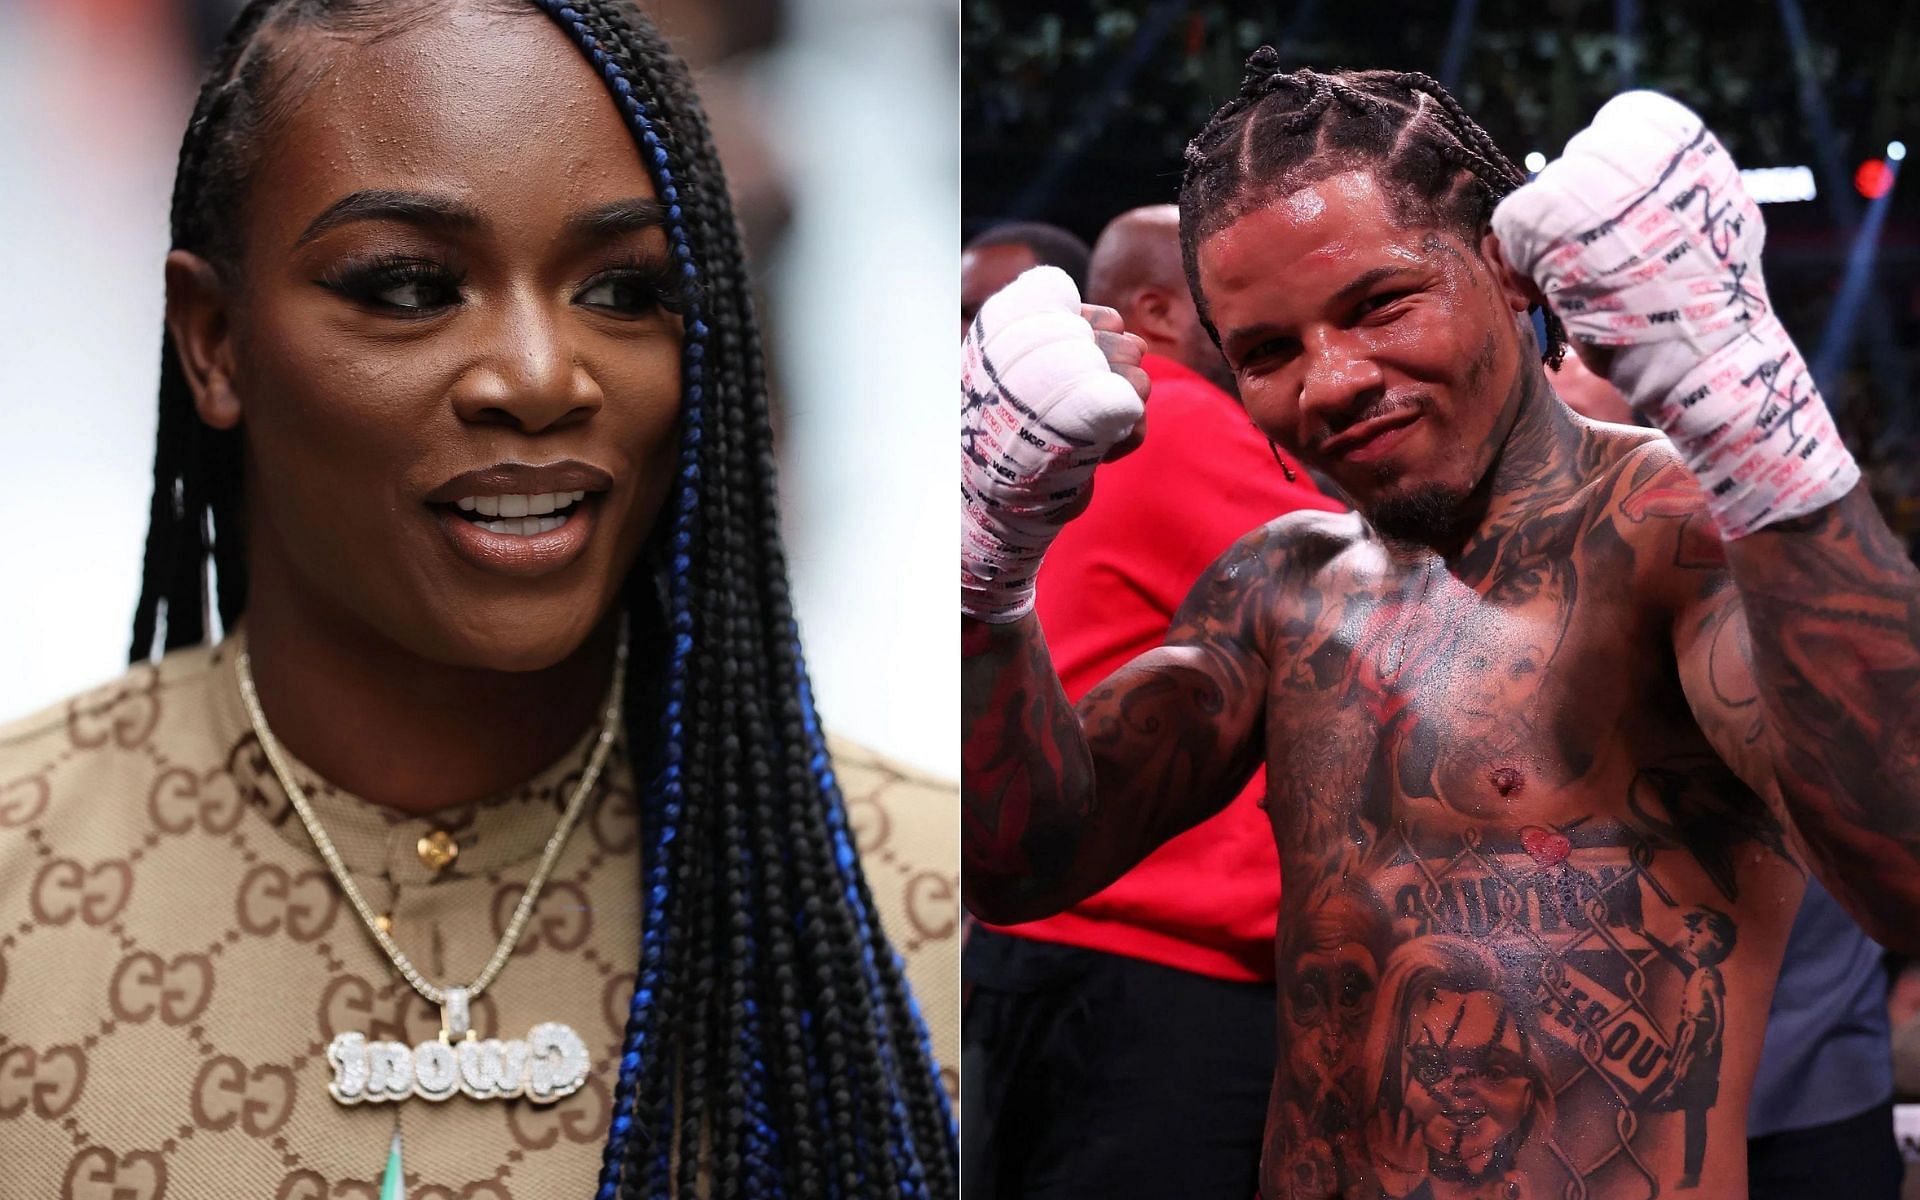 Claressa Shields (left) issues a message to Gervonta Davis (right) [Images via Getty]